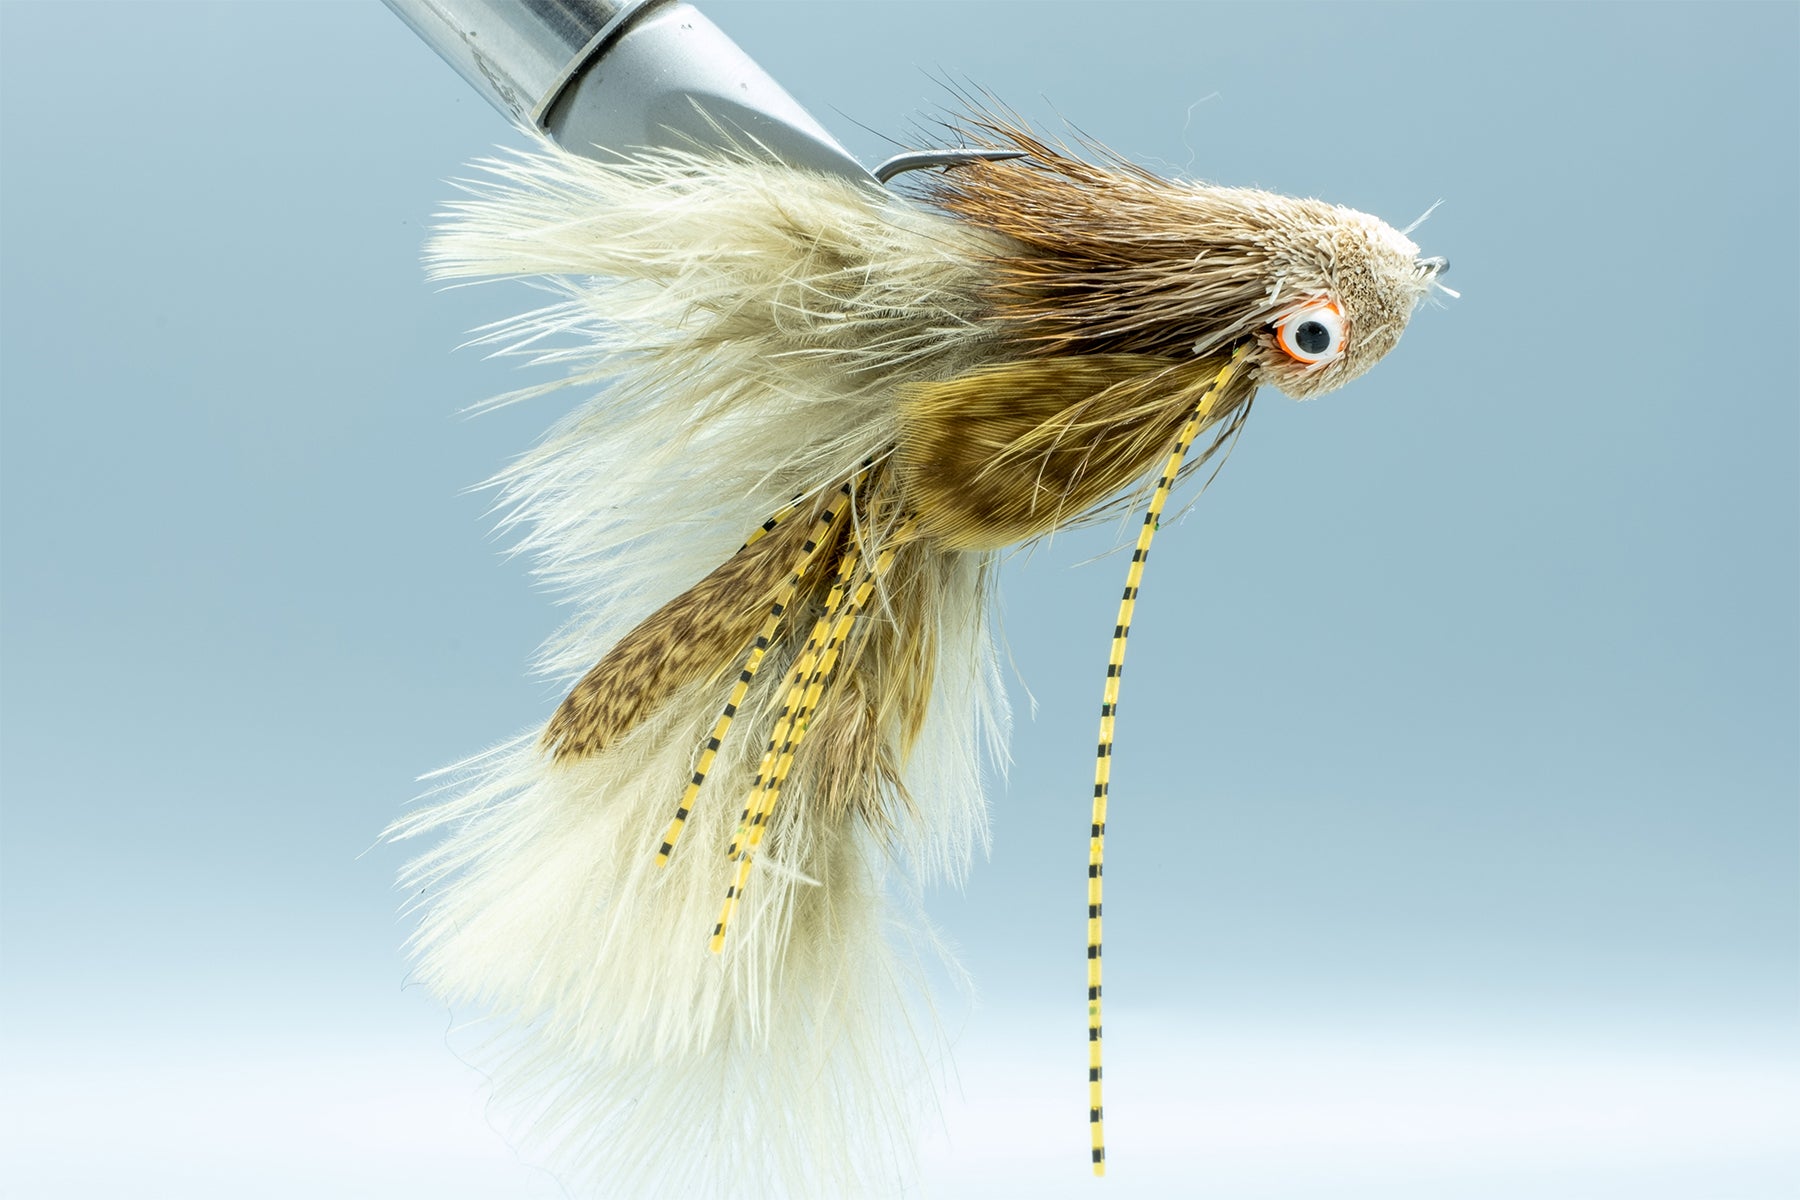 Scientific anglers debuts all-new Magnitude clear fly lines